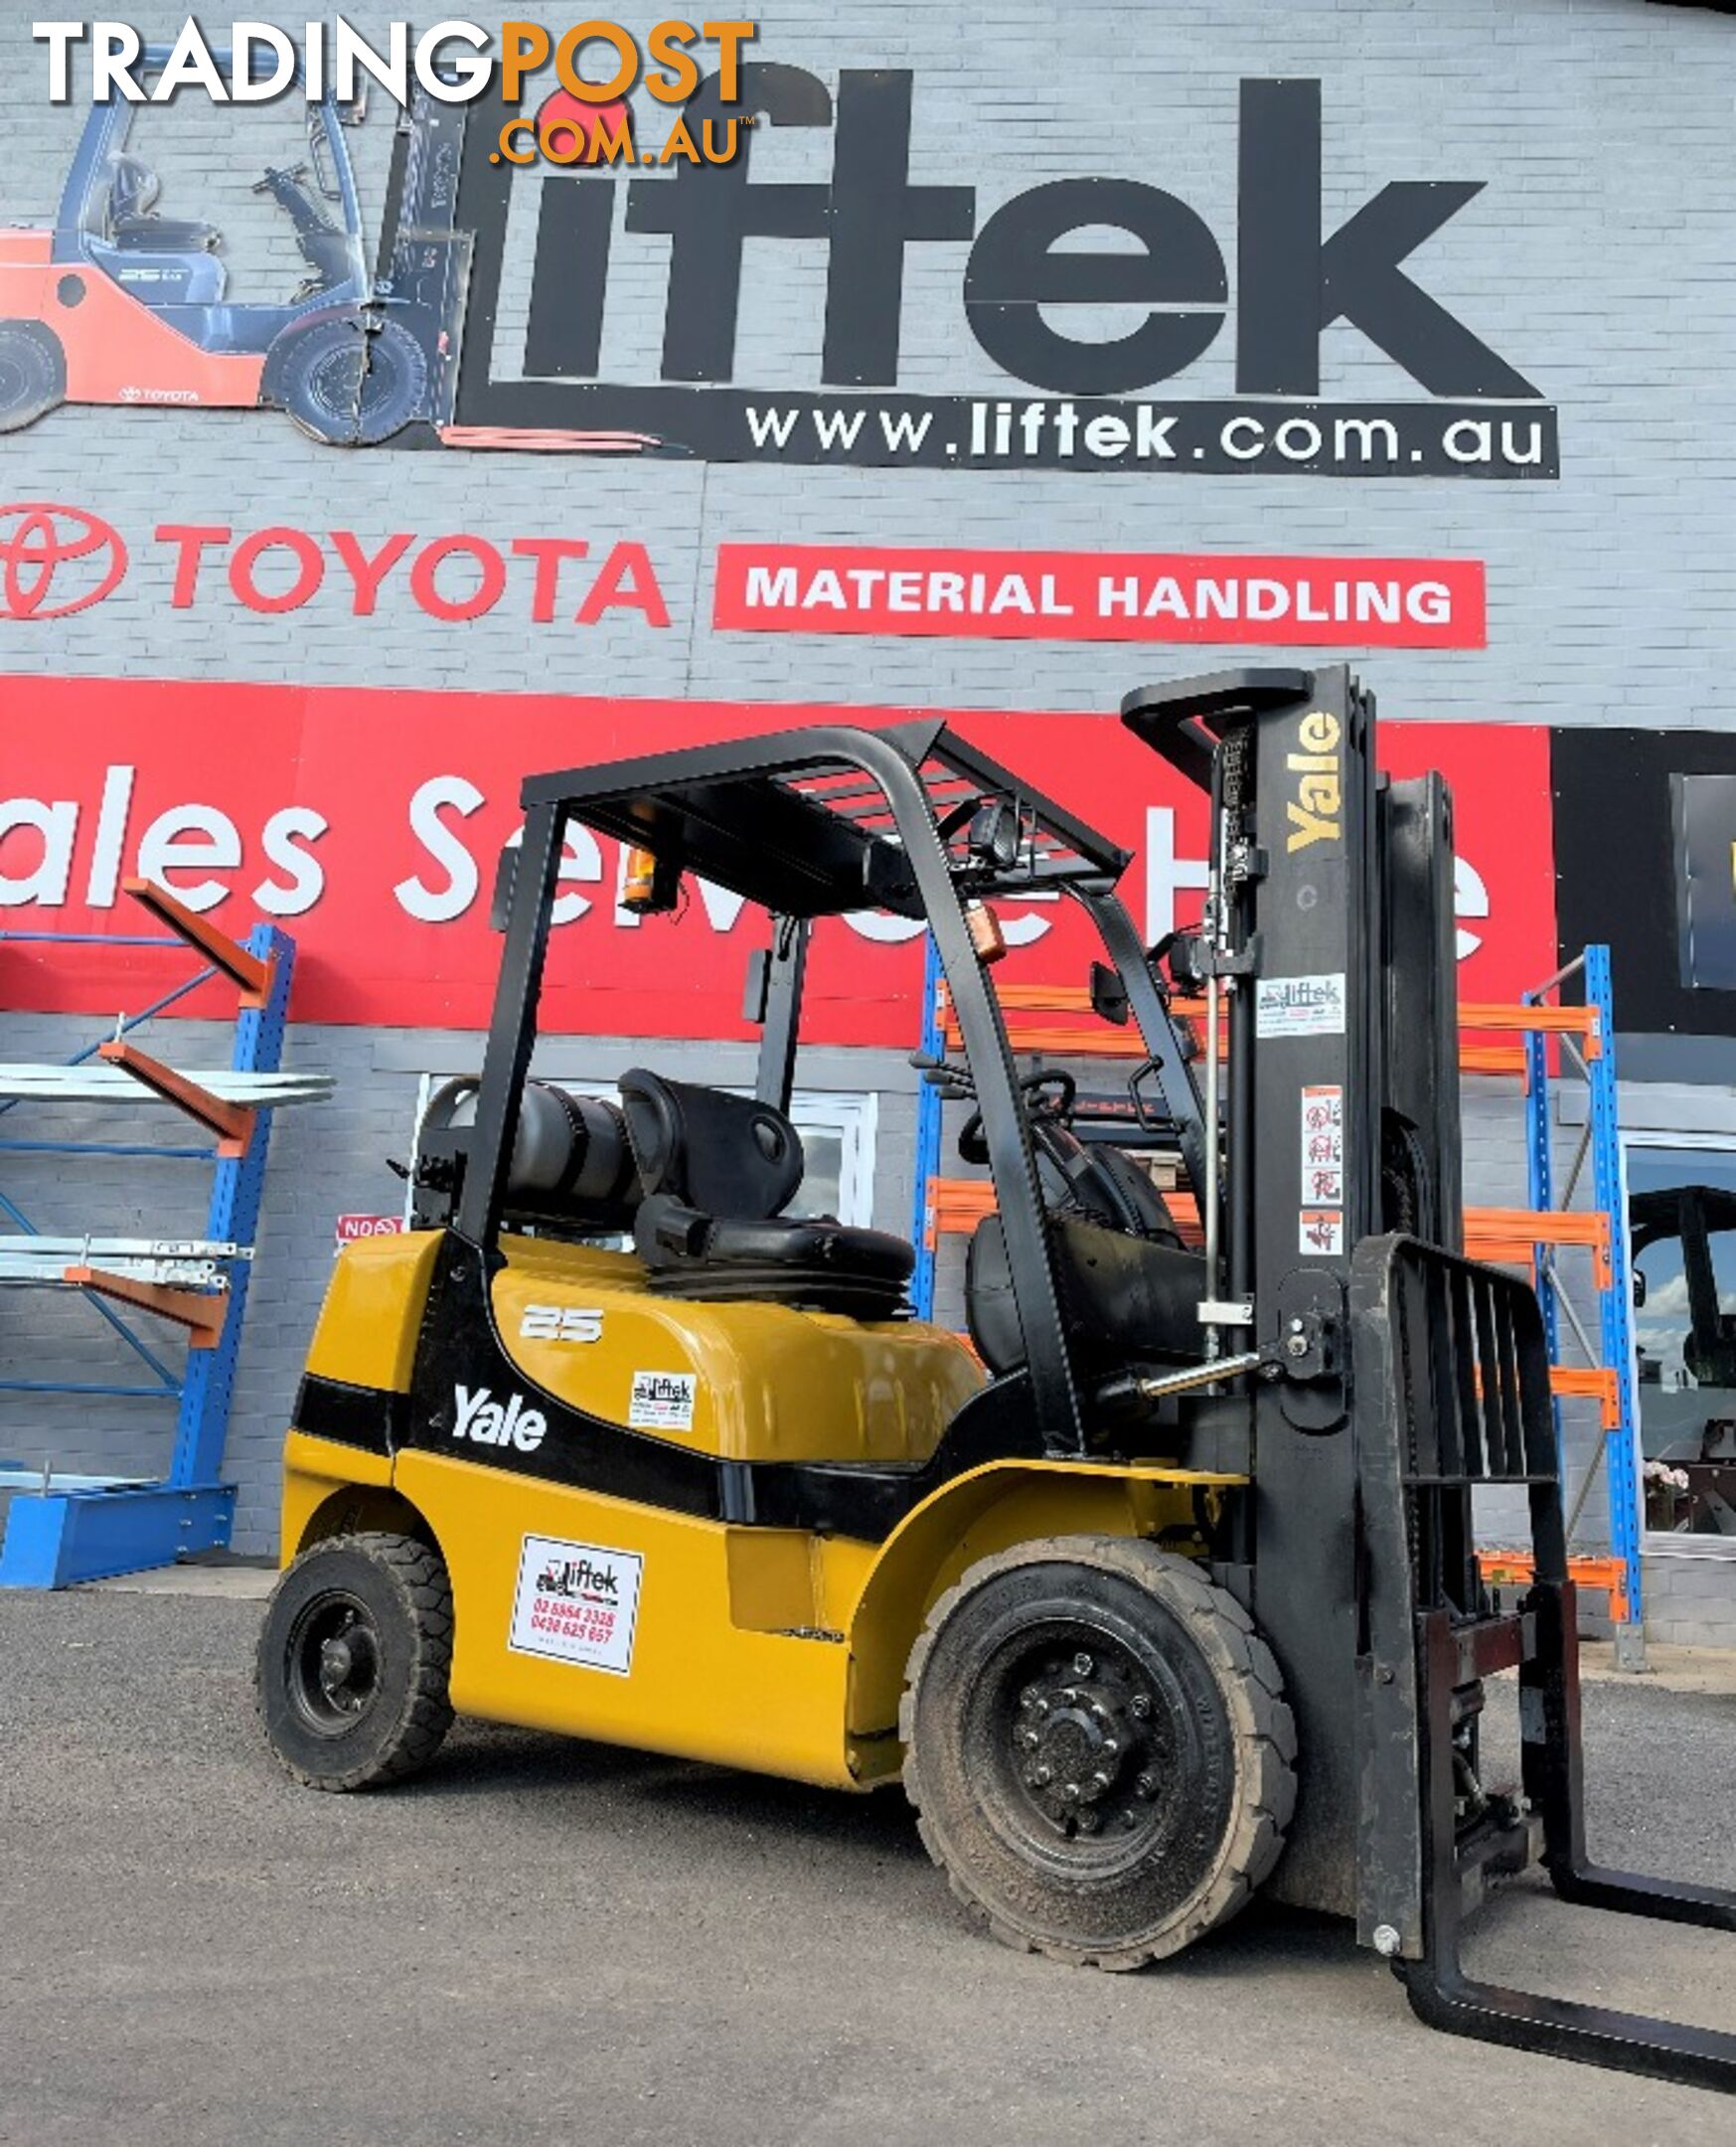 Used Yale 2.5TON Forklift For Sale